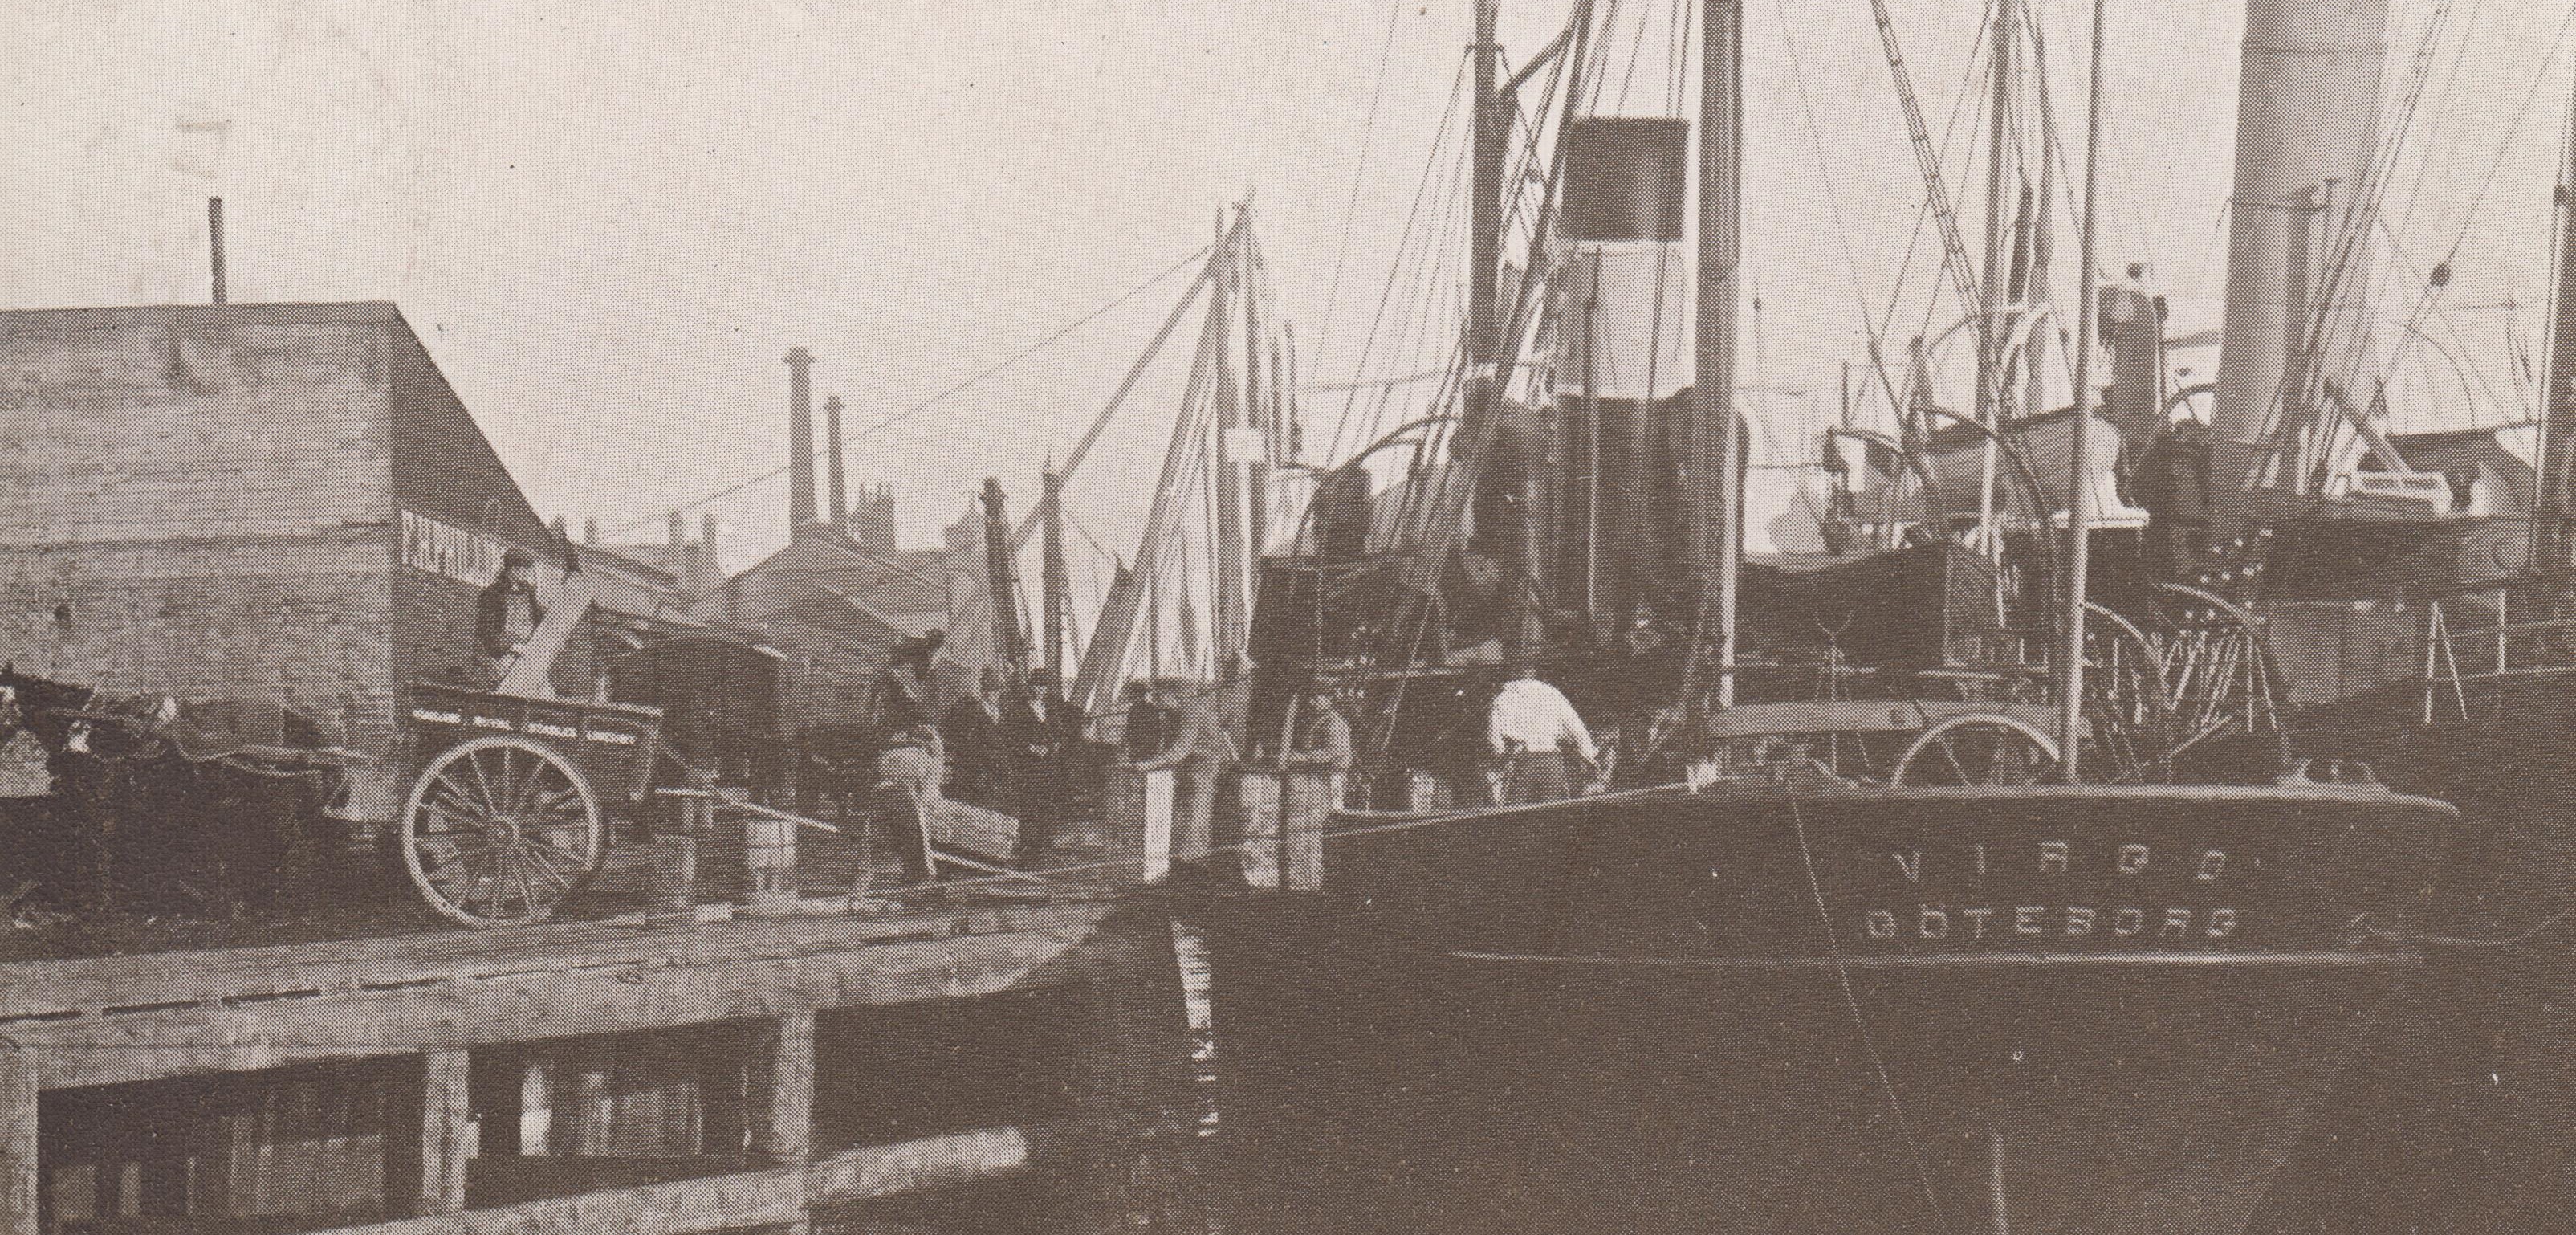 Photograph of a ship in Lowestoft docks in the early 20th century